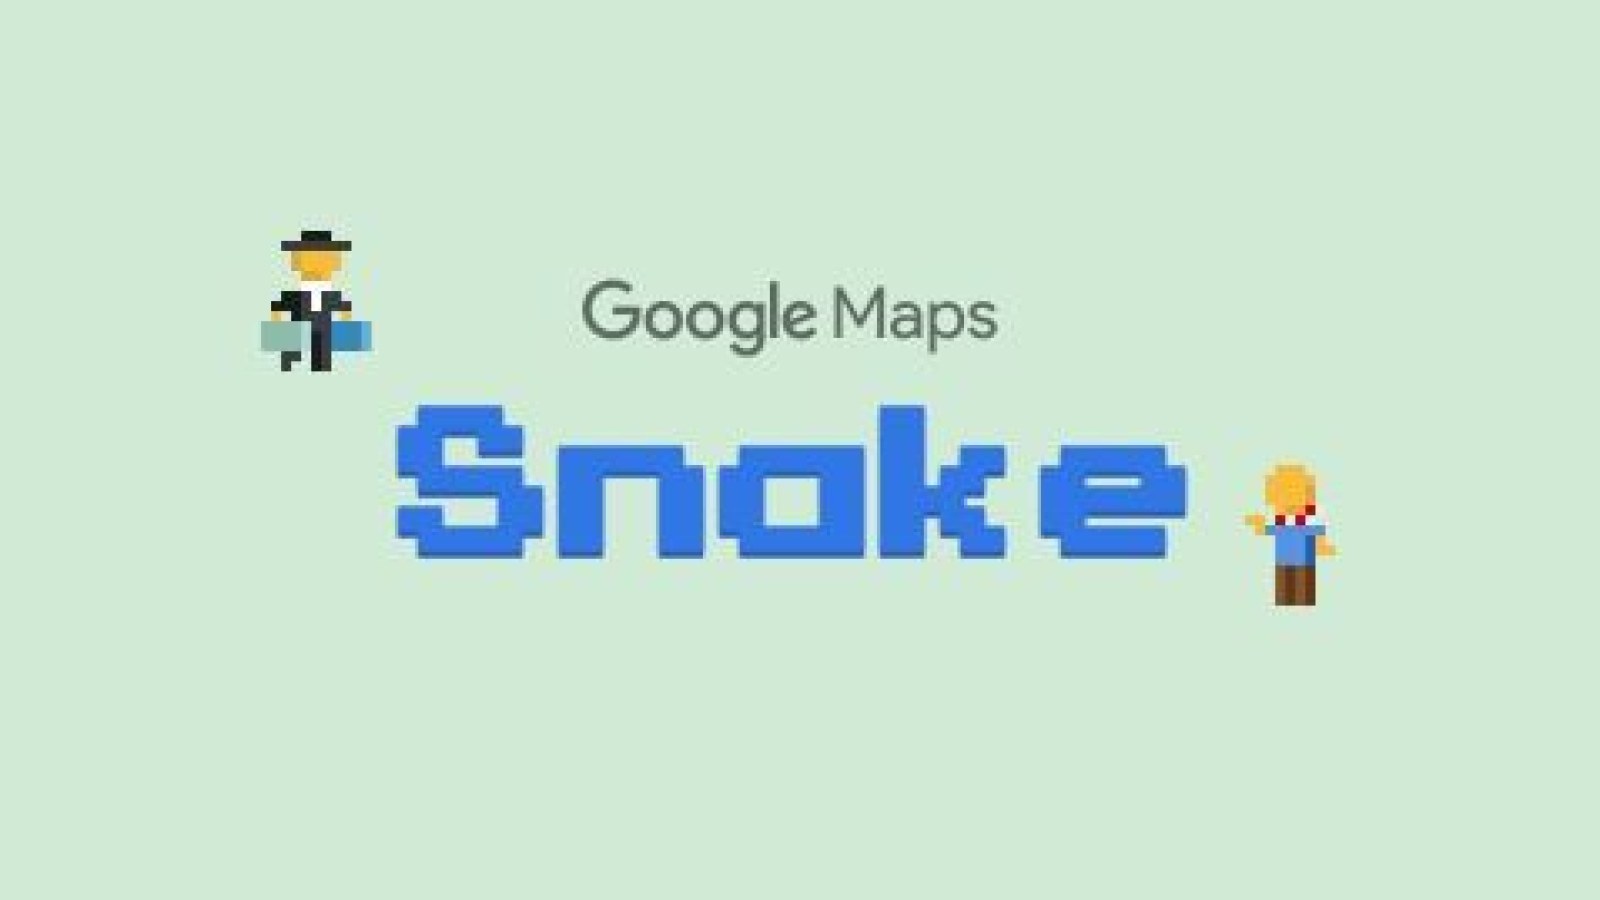 How To Play 'Snake' In Google Maps For April Fools Right Now